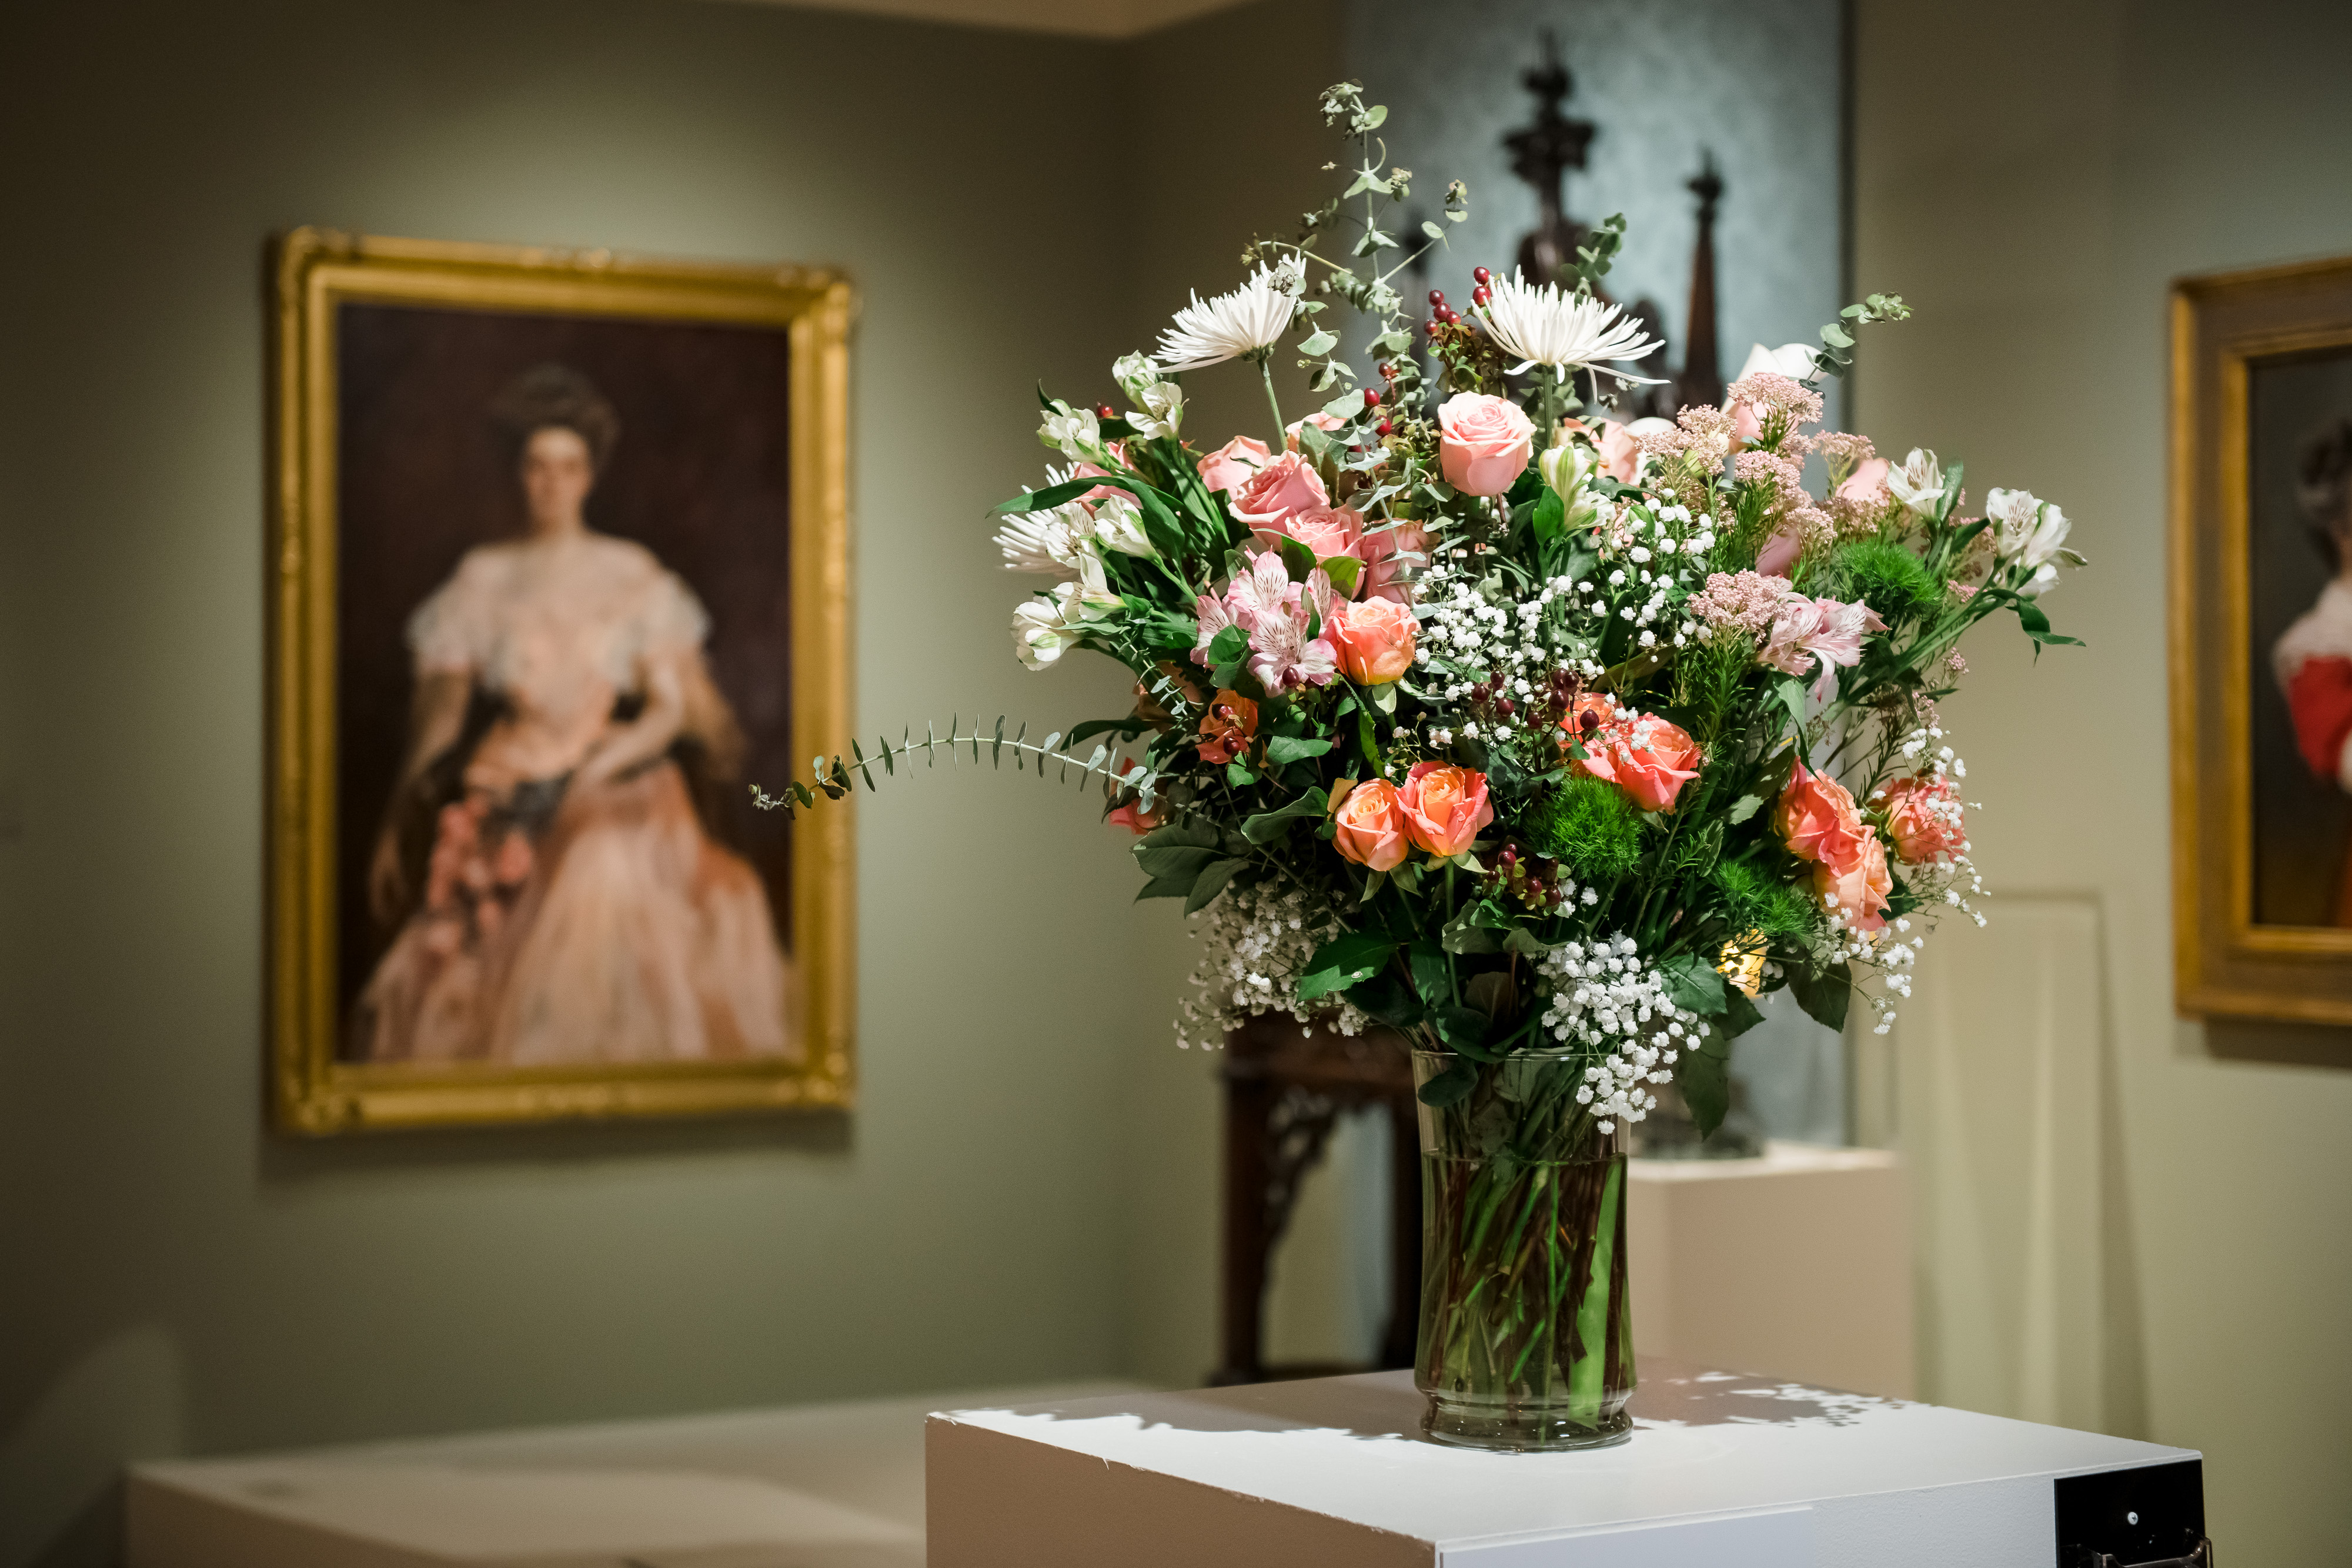 Art and Flowers Combine at Milwaukee Art Museum’s Art in Bloom